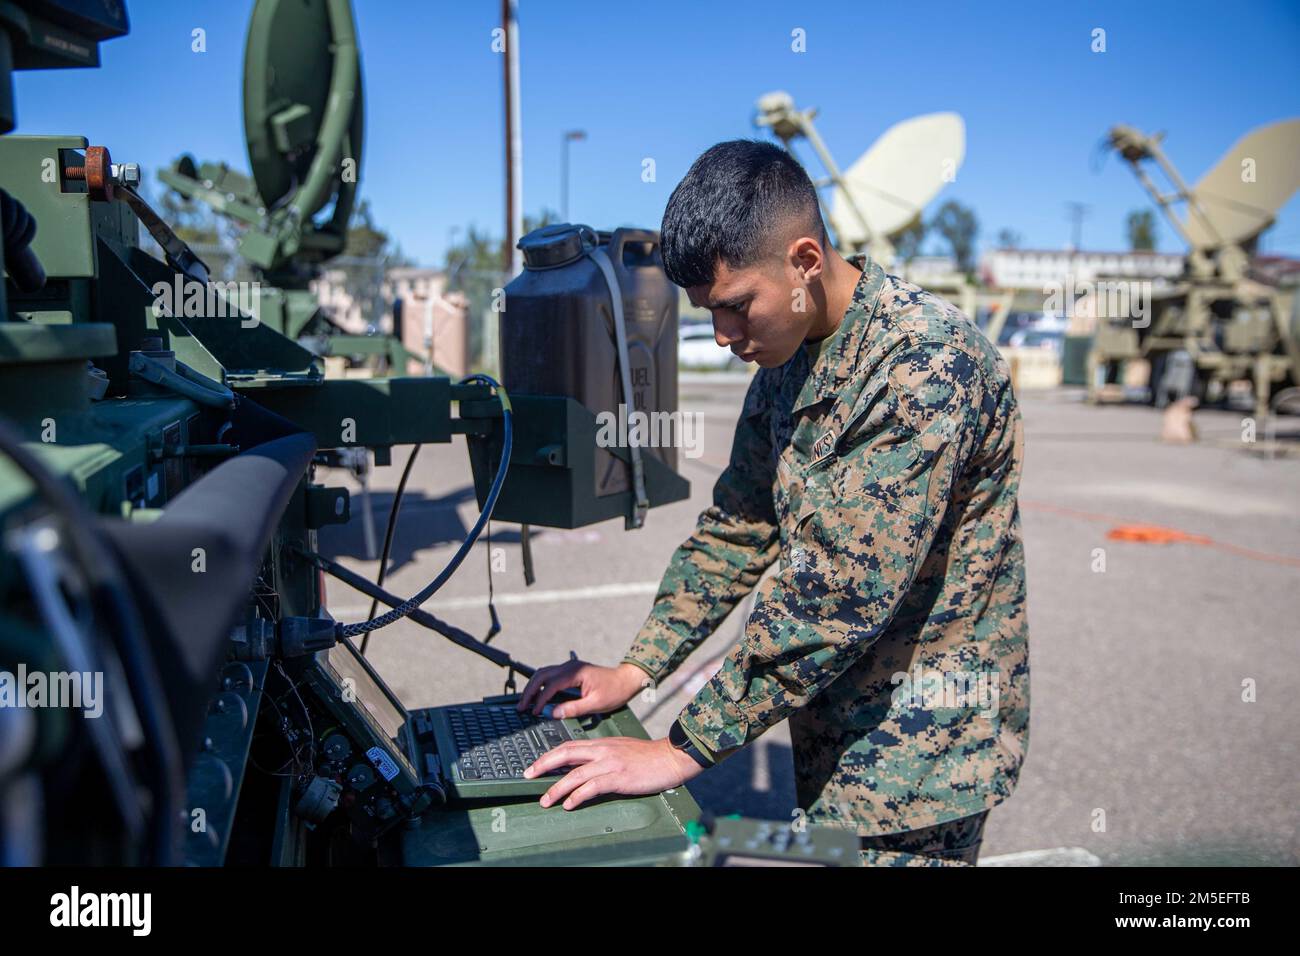 U.S. Marine Corps Lance Cpl. Marvin Diaz, a satellite communications operator with 9th Communication Battalion, I Marine Expeditionary Force Information Group, operates on the Secure Mobile Anti-Jam Reliable Tactical Terminal at Marine Corps Base Camp Pendleton, California, March 11, 2022. This training allows the 9th Communication Battalion to be capable of operating, defending, and preserving information networks to enable command and control for the commander in all domains, and support and conduct Marine Air Ground Task Force operations in the information environment. Stock Photo